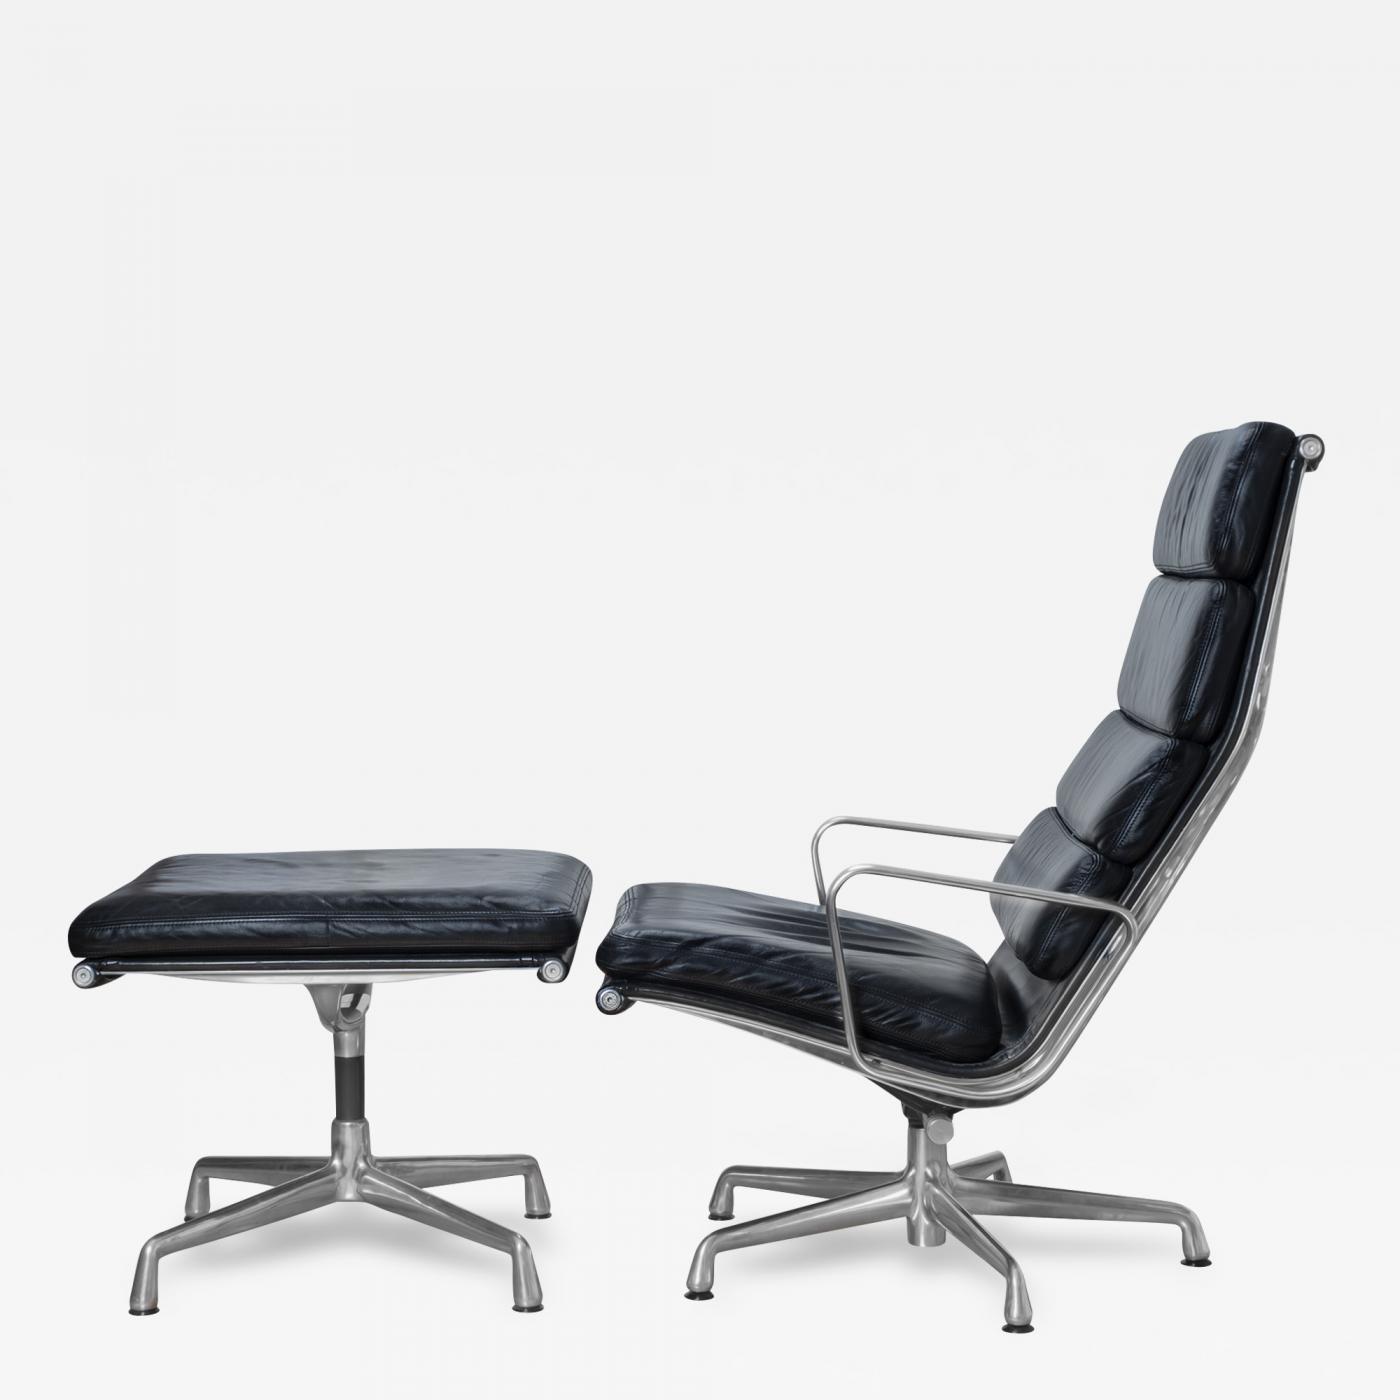 Eames Soft Pad Group Management Chair for Herman Miller